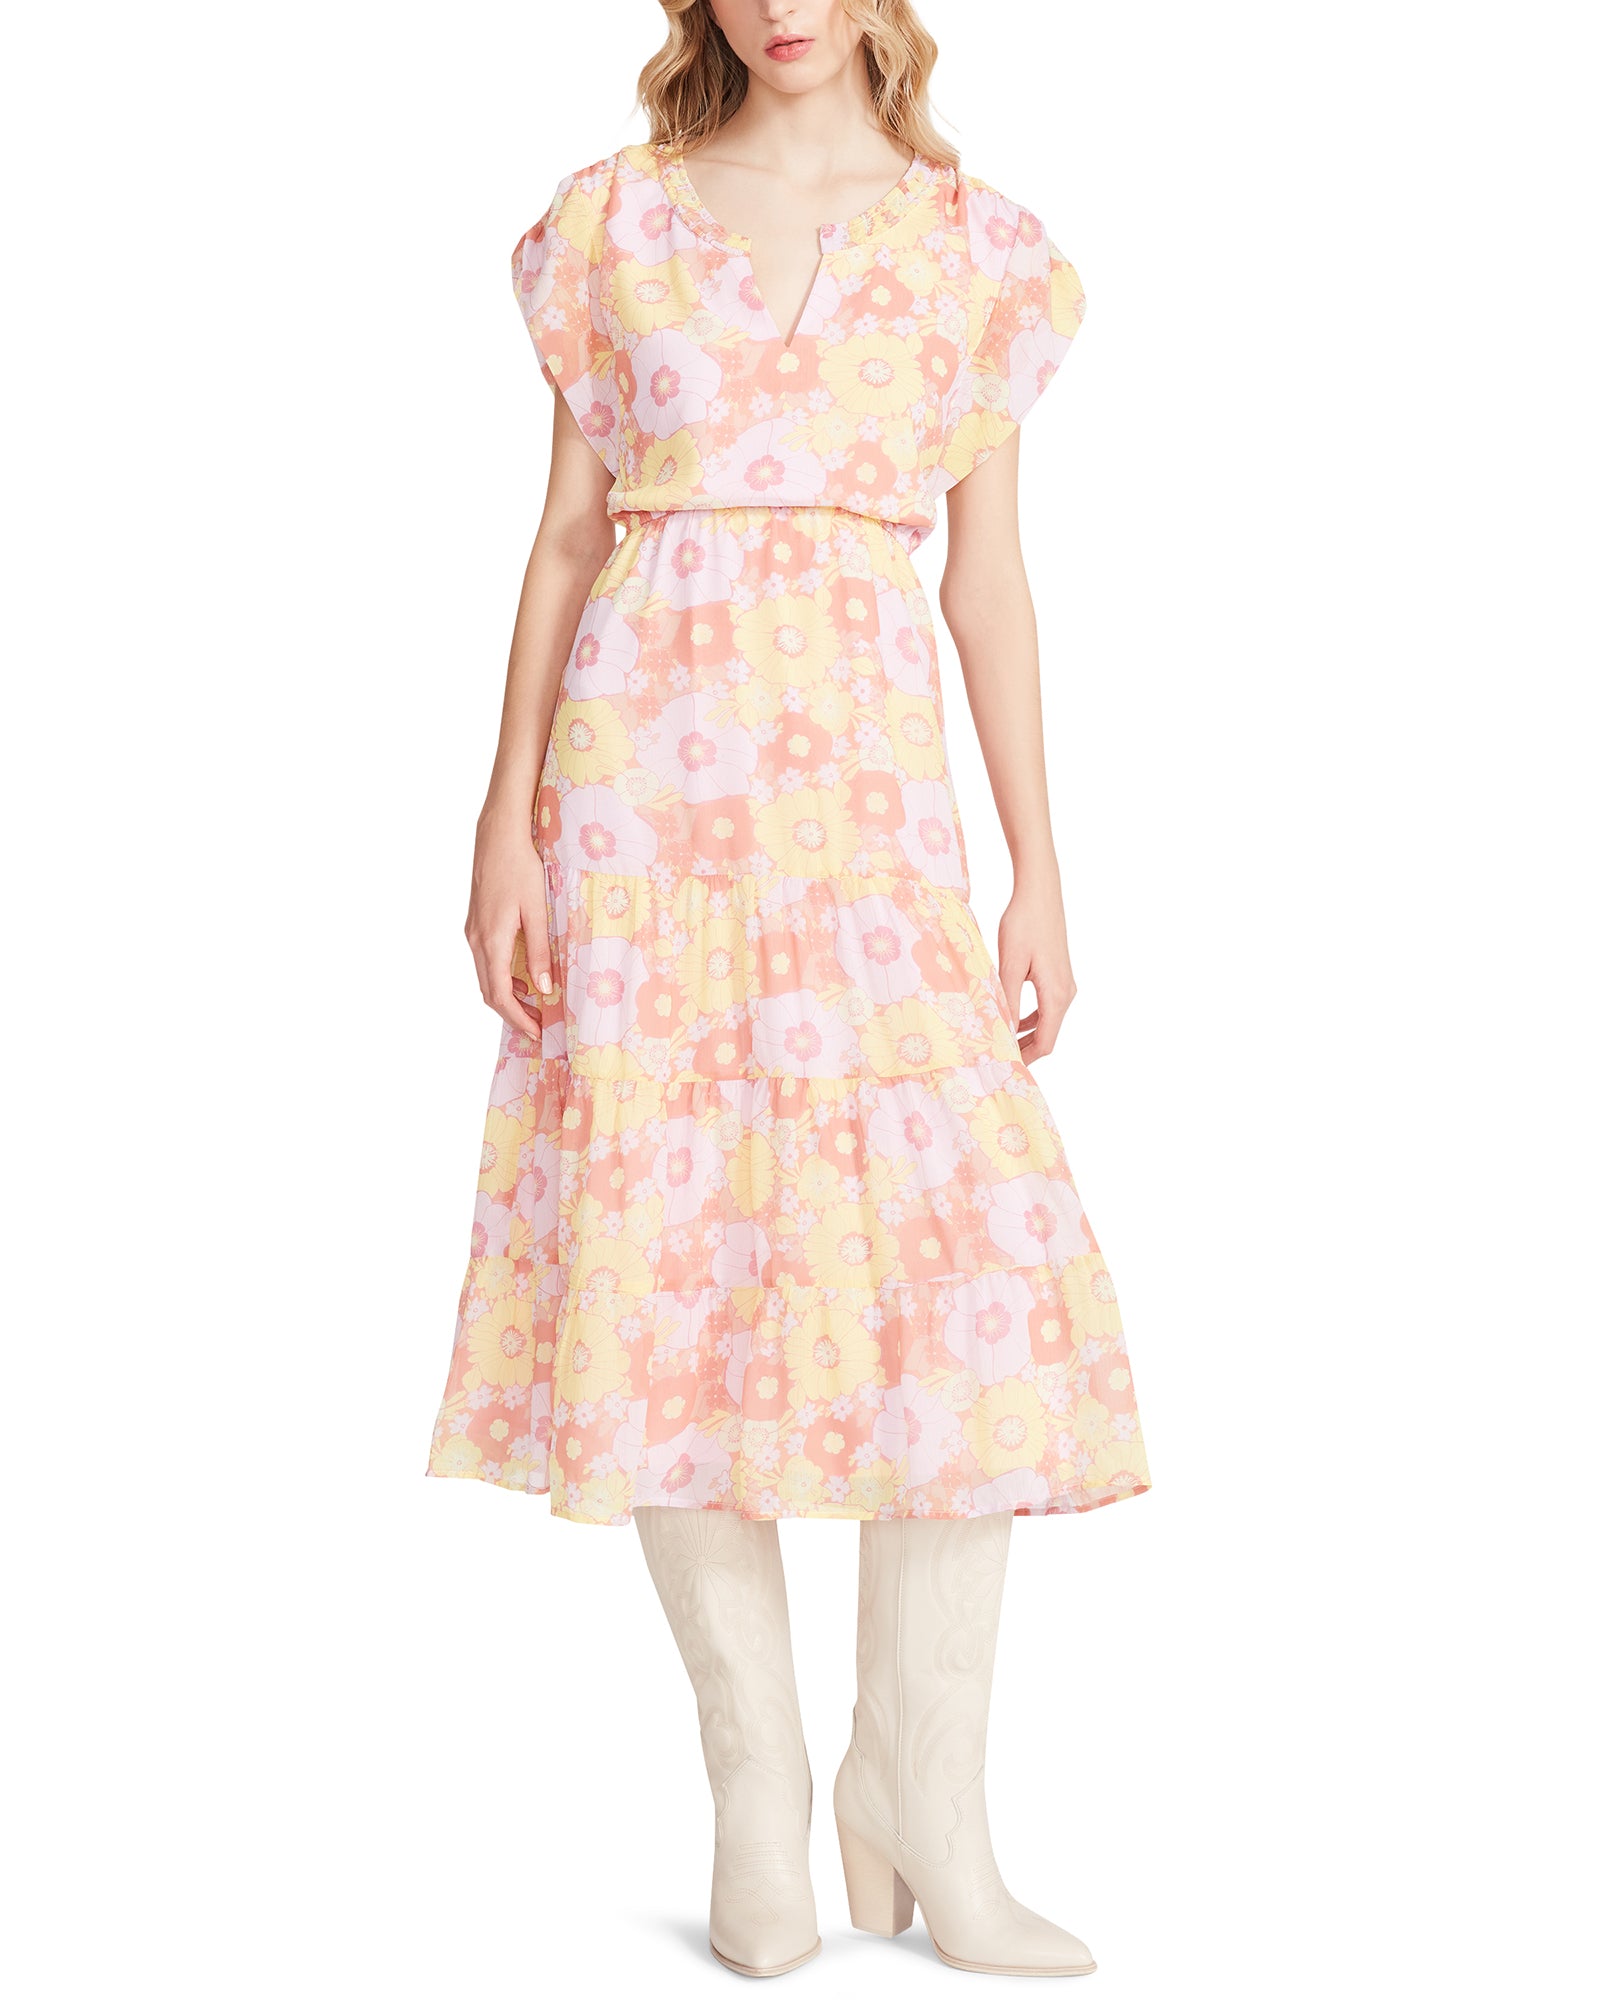 STEVE MADDEN LEIGH MIDI DRESS IN PINK FLORAL